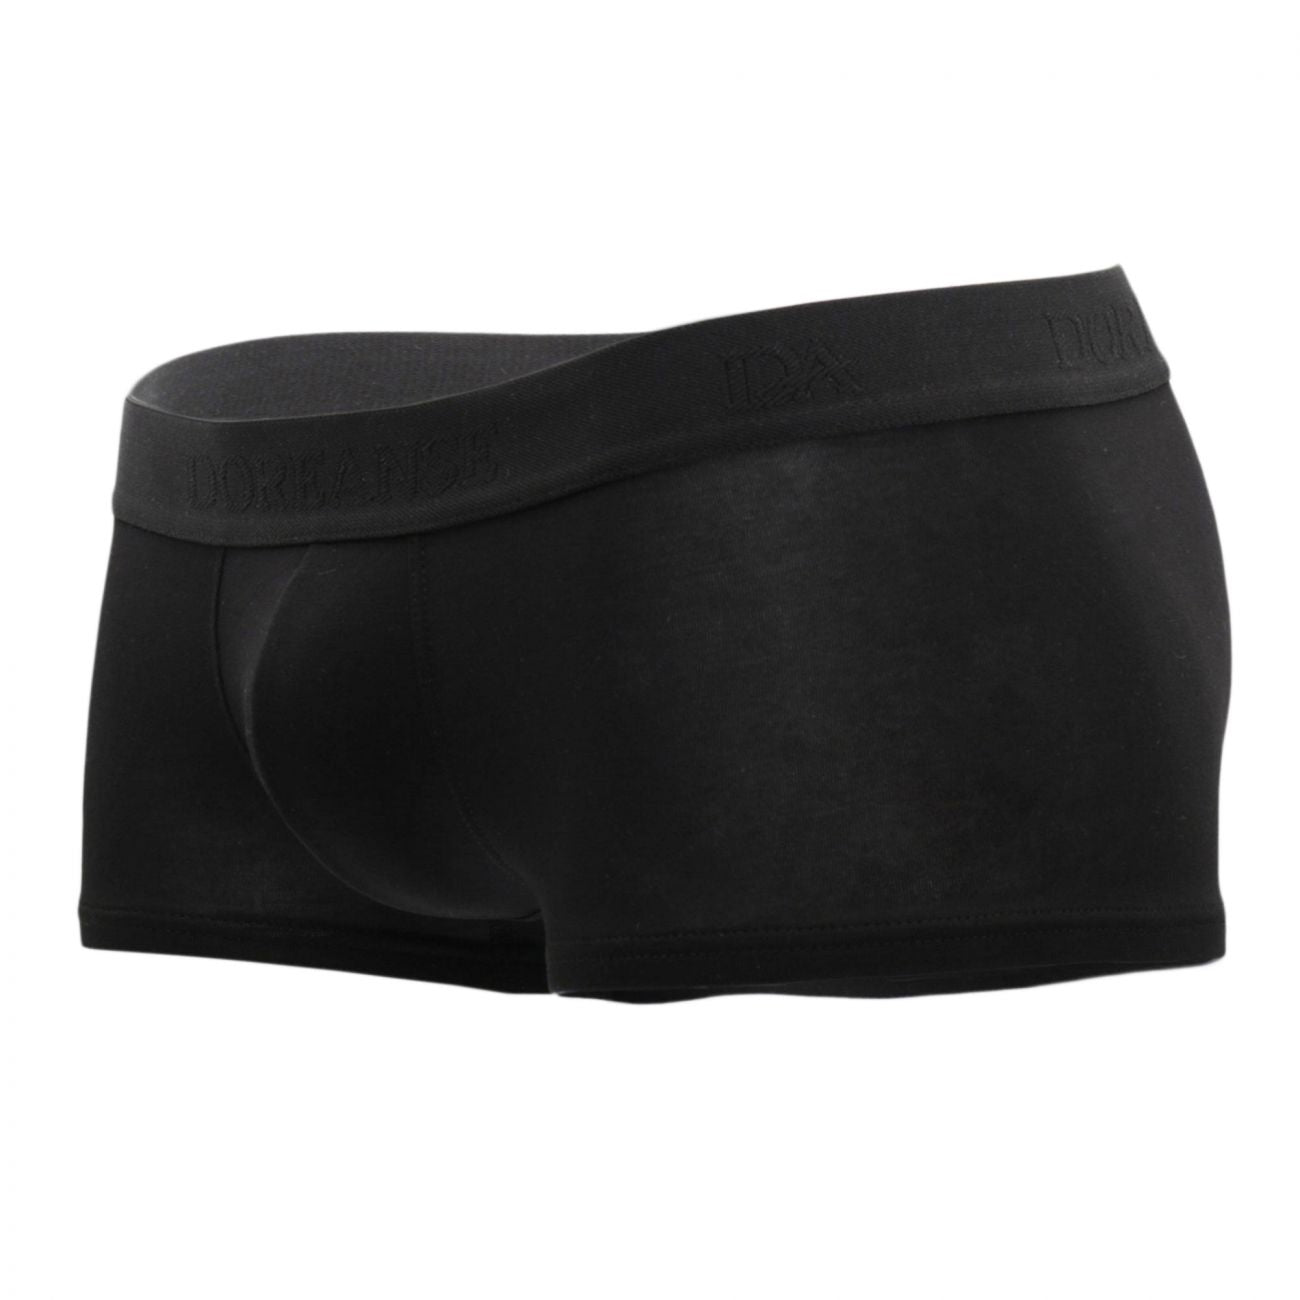 under-yours - Low-rise Trunk - Doreanse - Mens Underwear